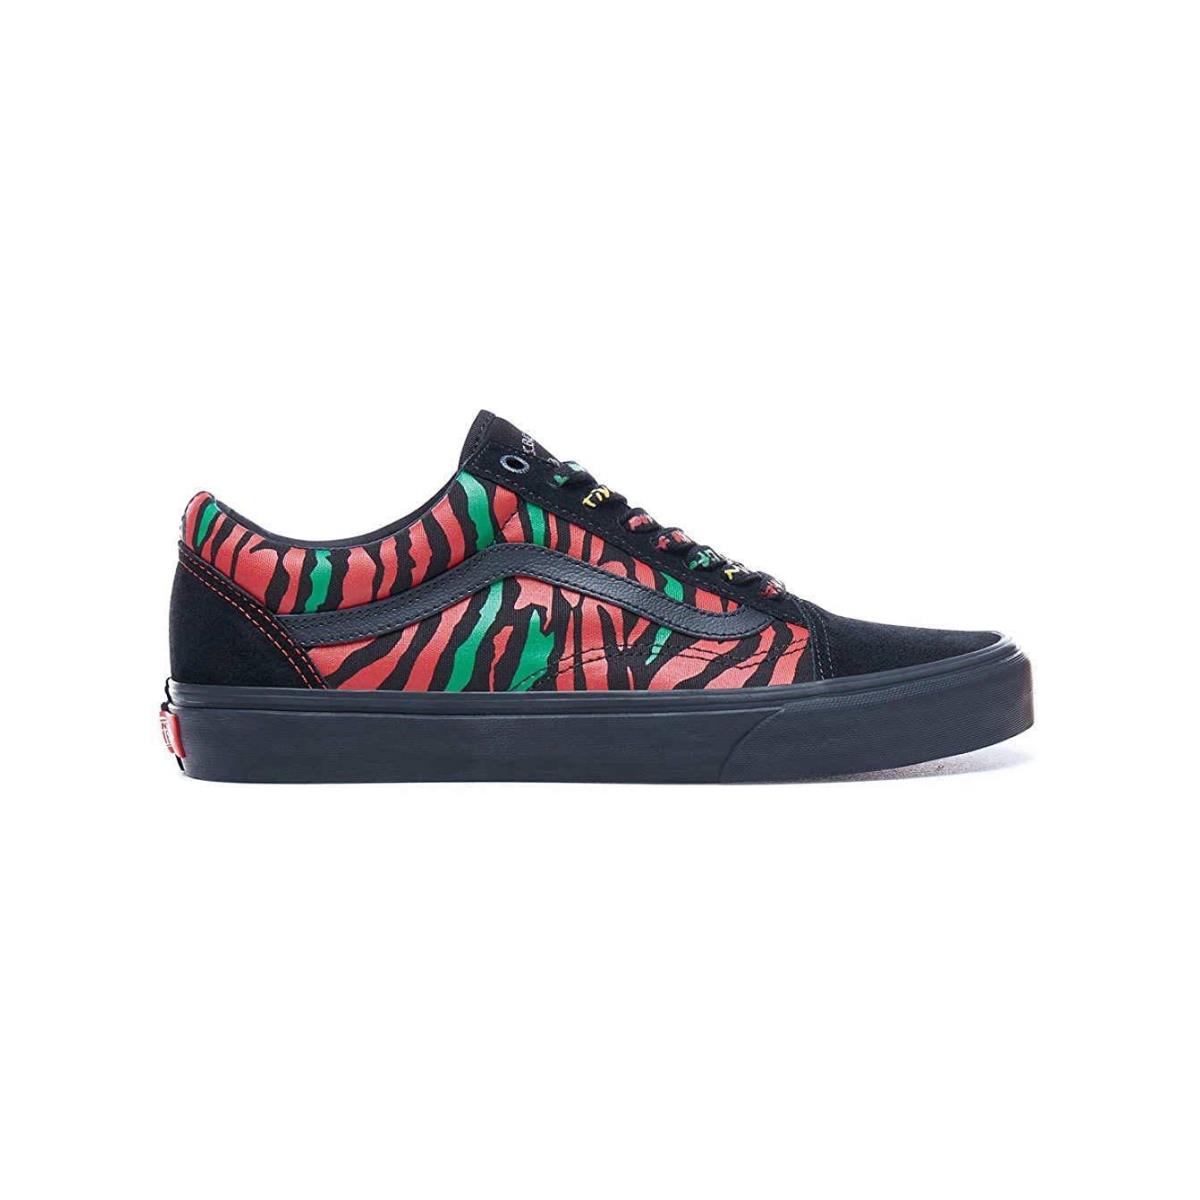 Vans Unisex Old Skool Atcq A Tribe Called Quest Black Skate Shoes Mens 5.5